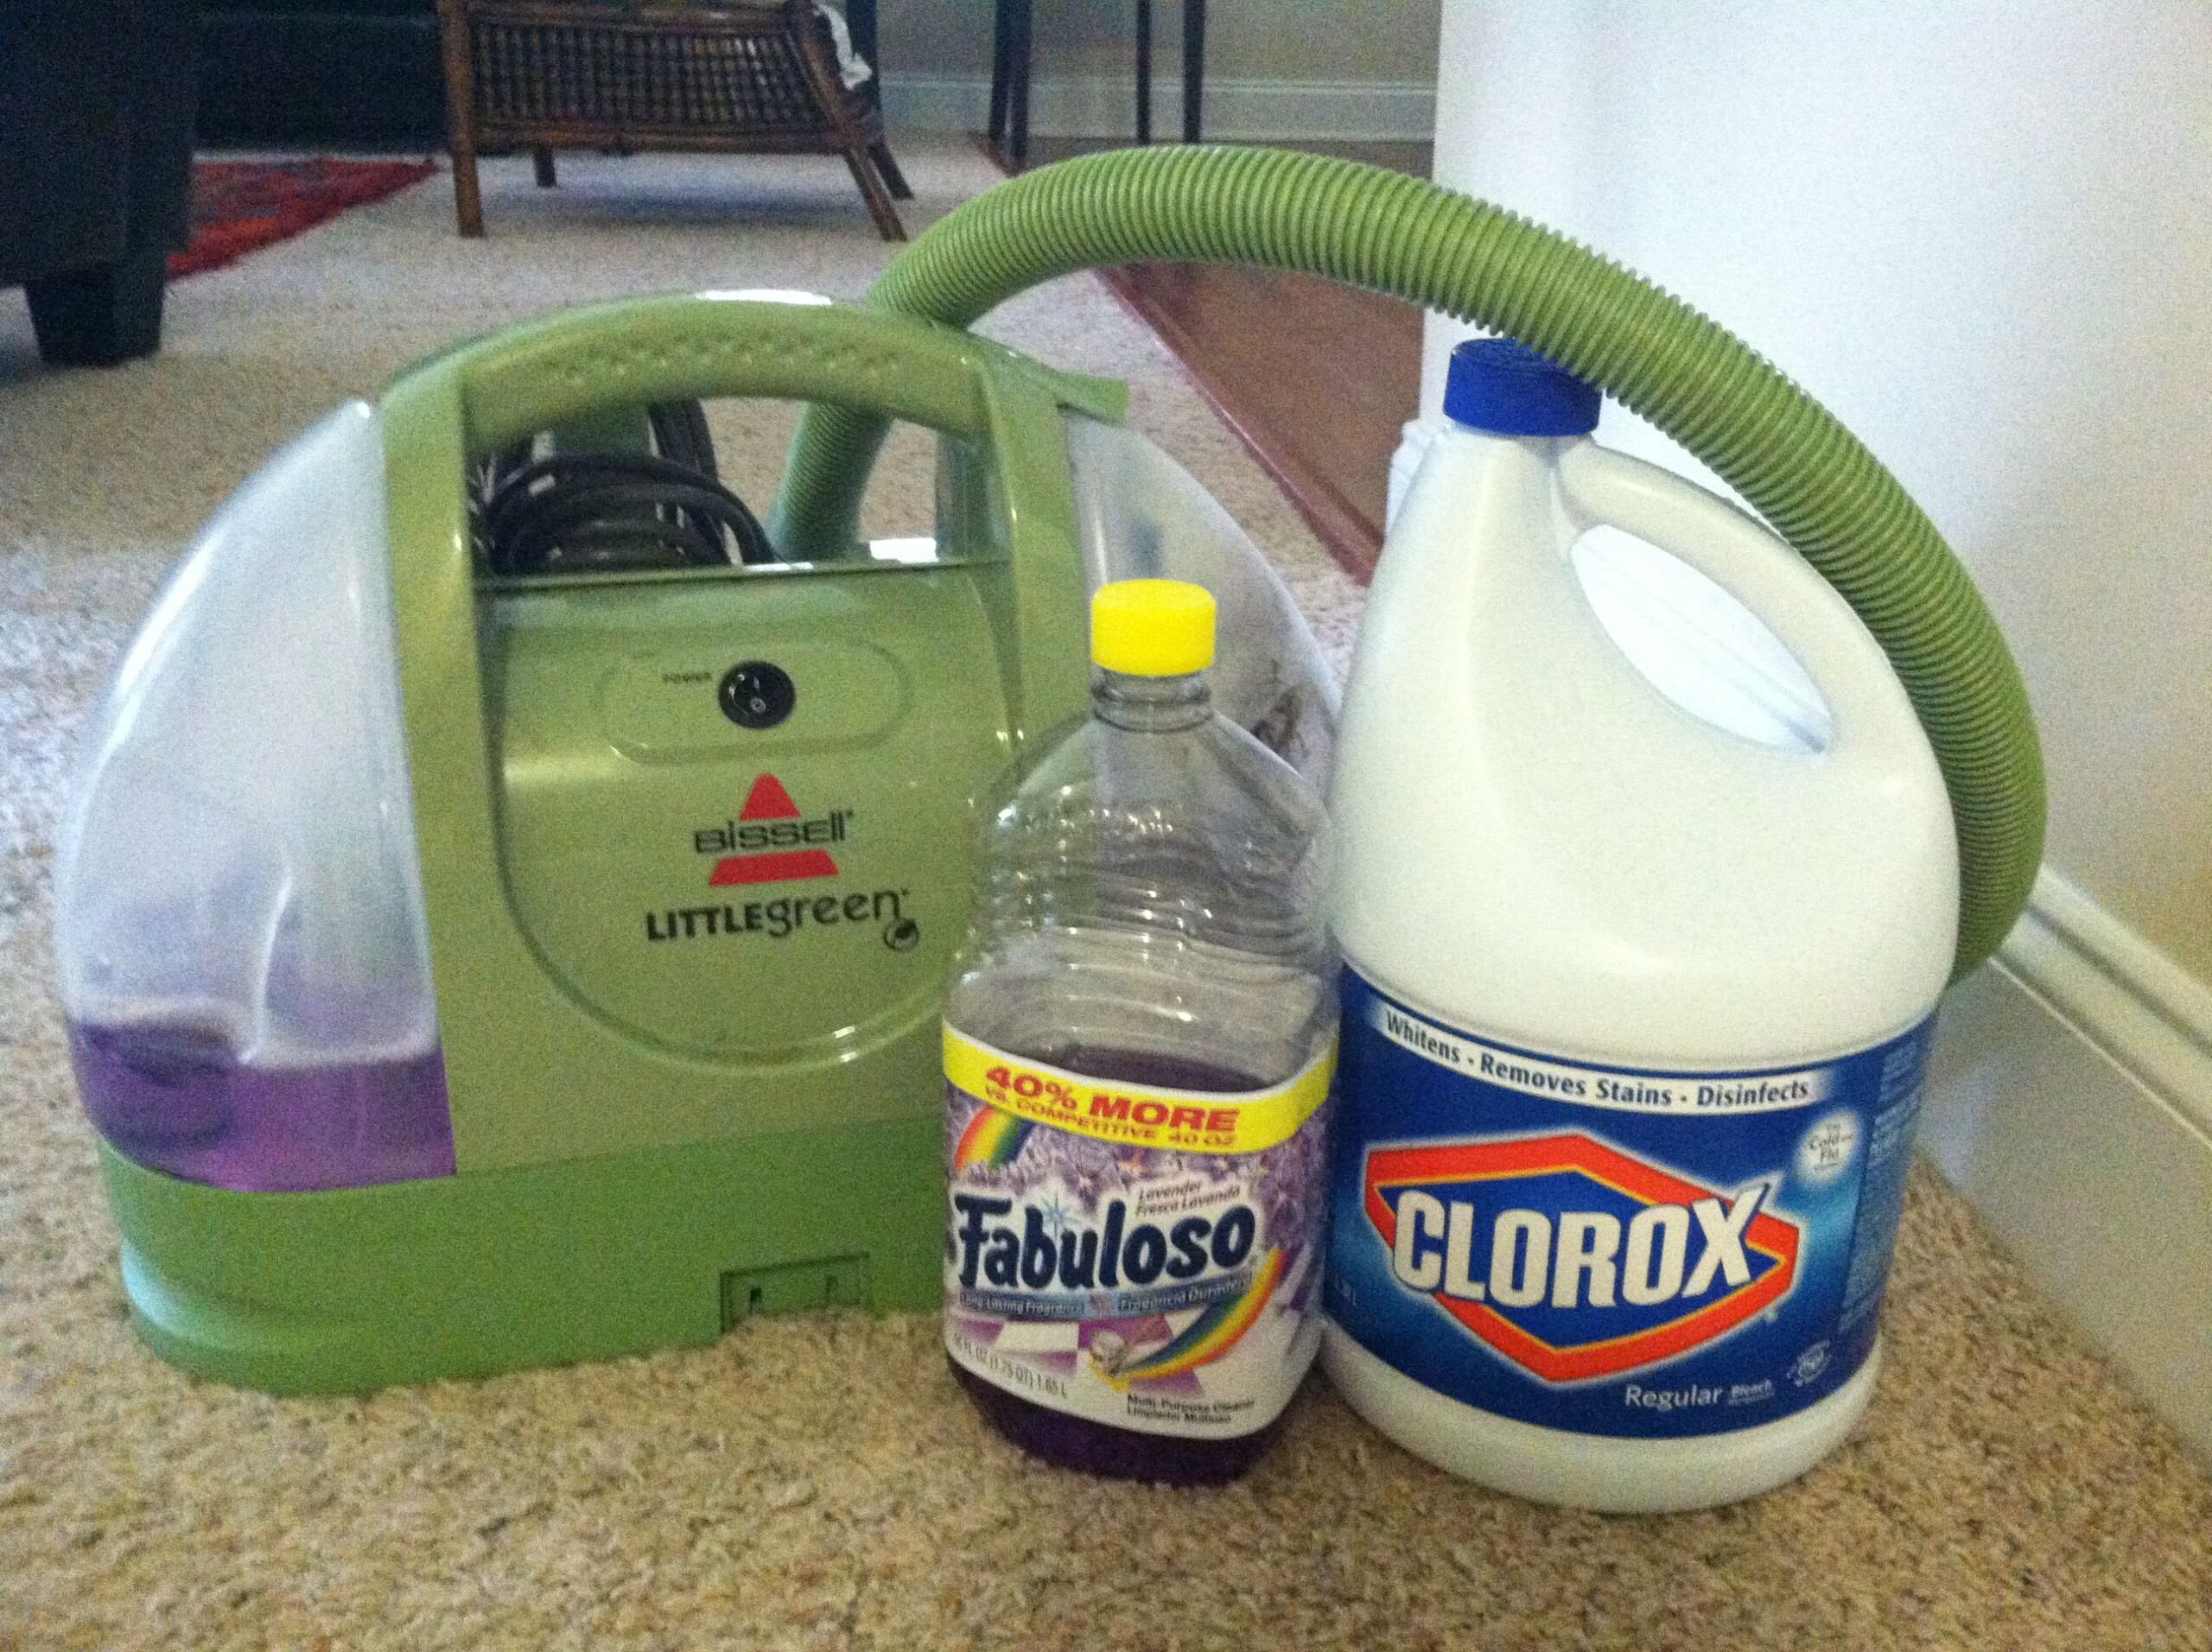 Can I Put Fabuloso in My Bissell Carpet Cleaner